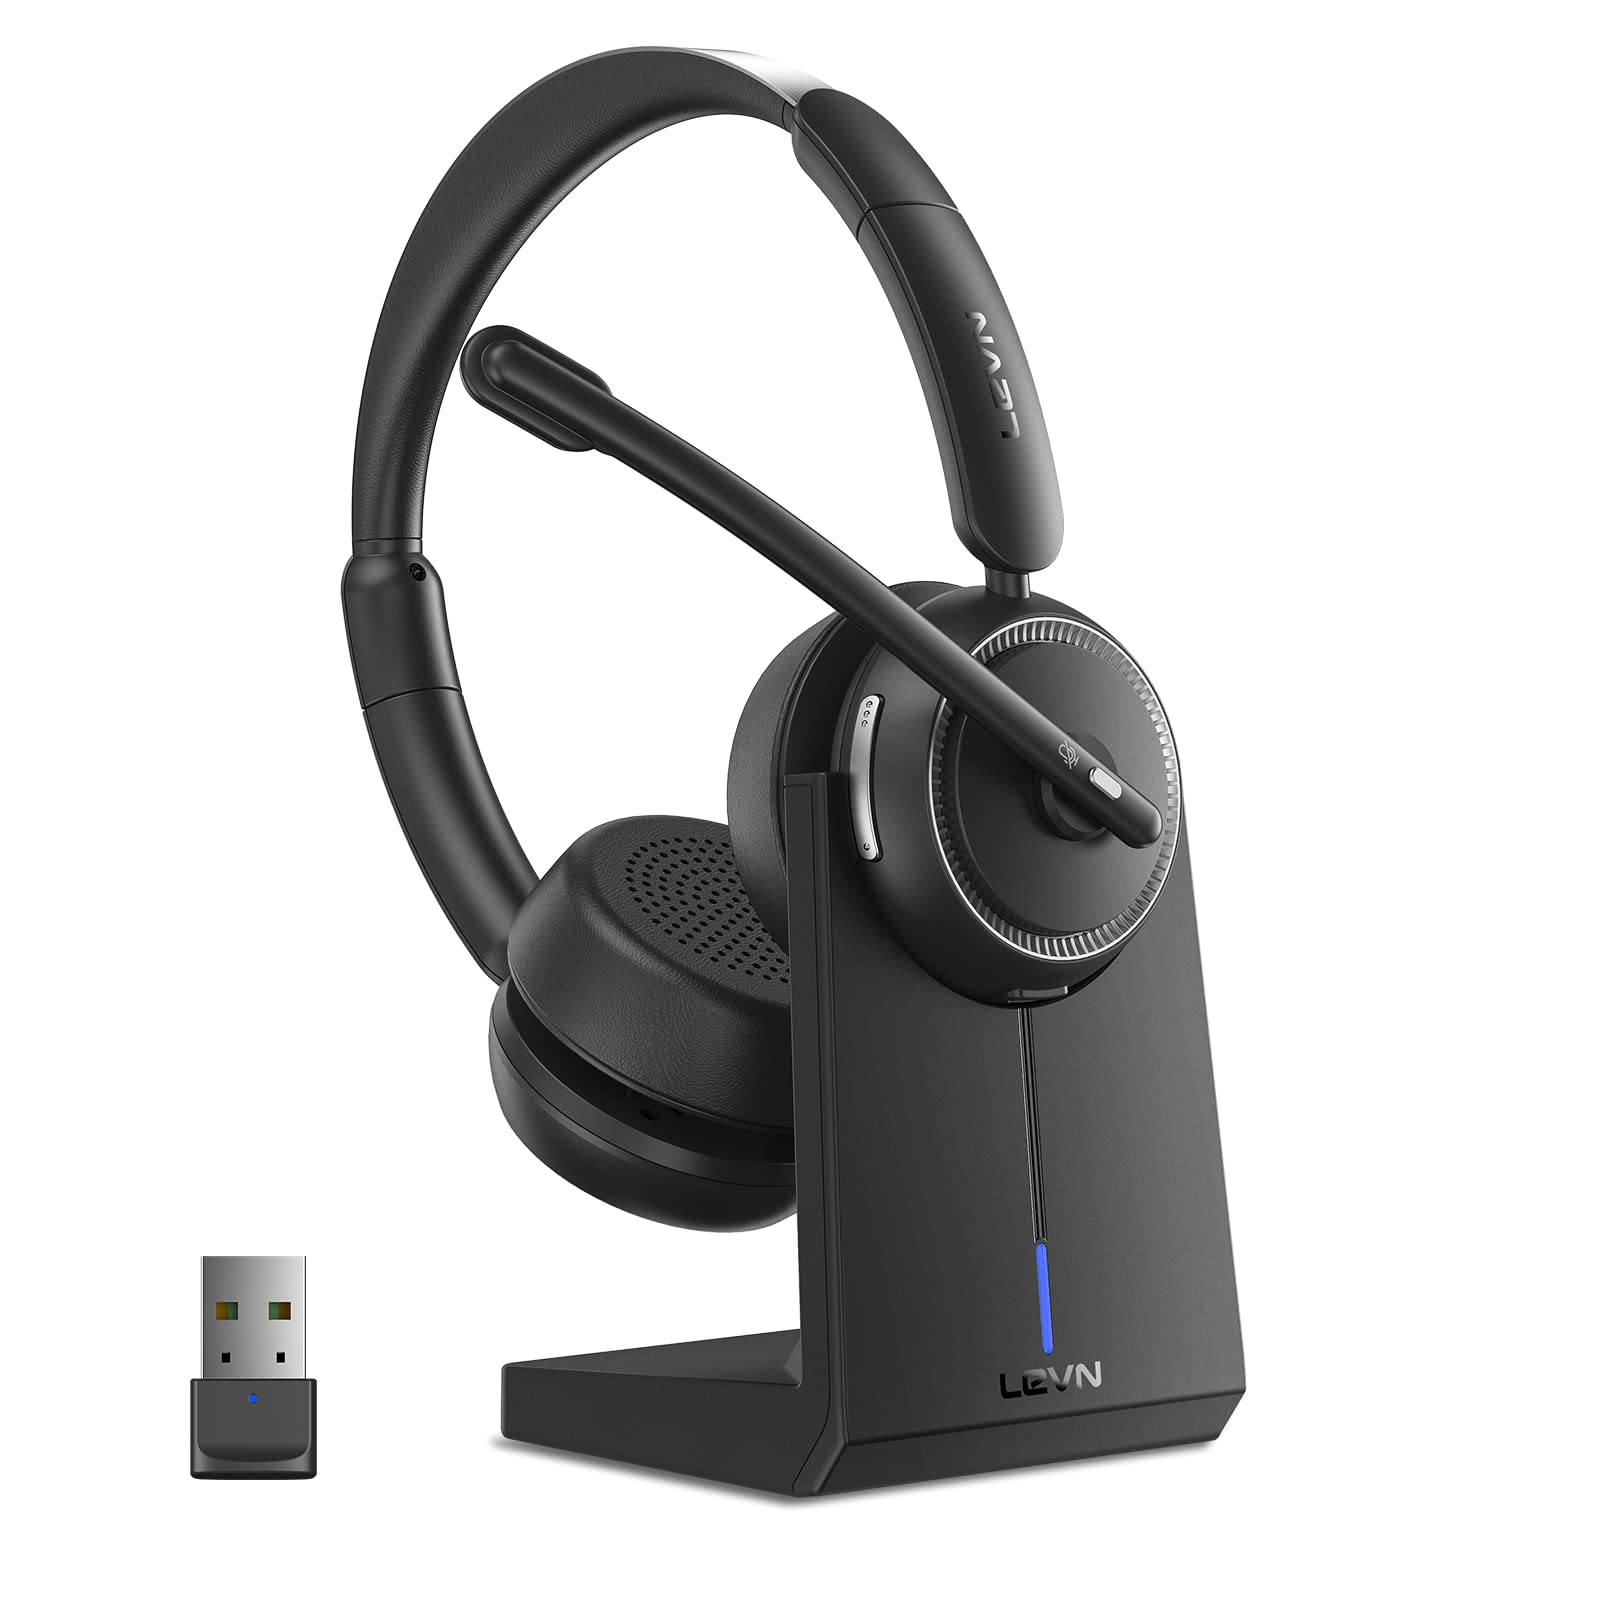 Wireless headset troubleshooting guide.